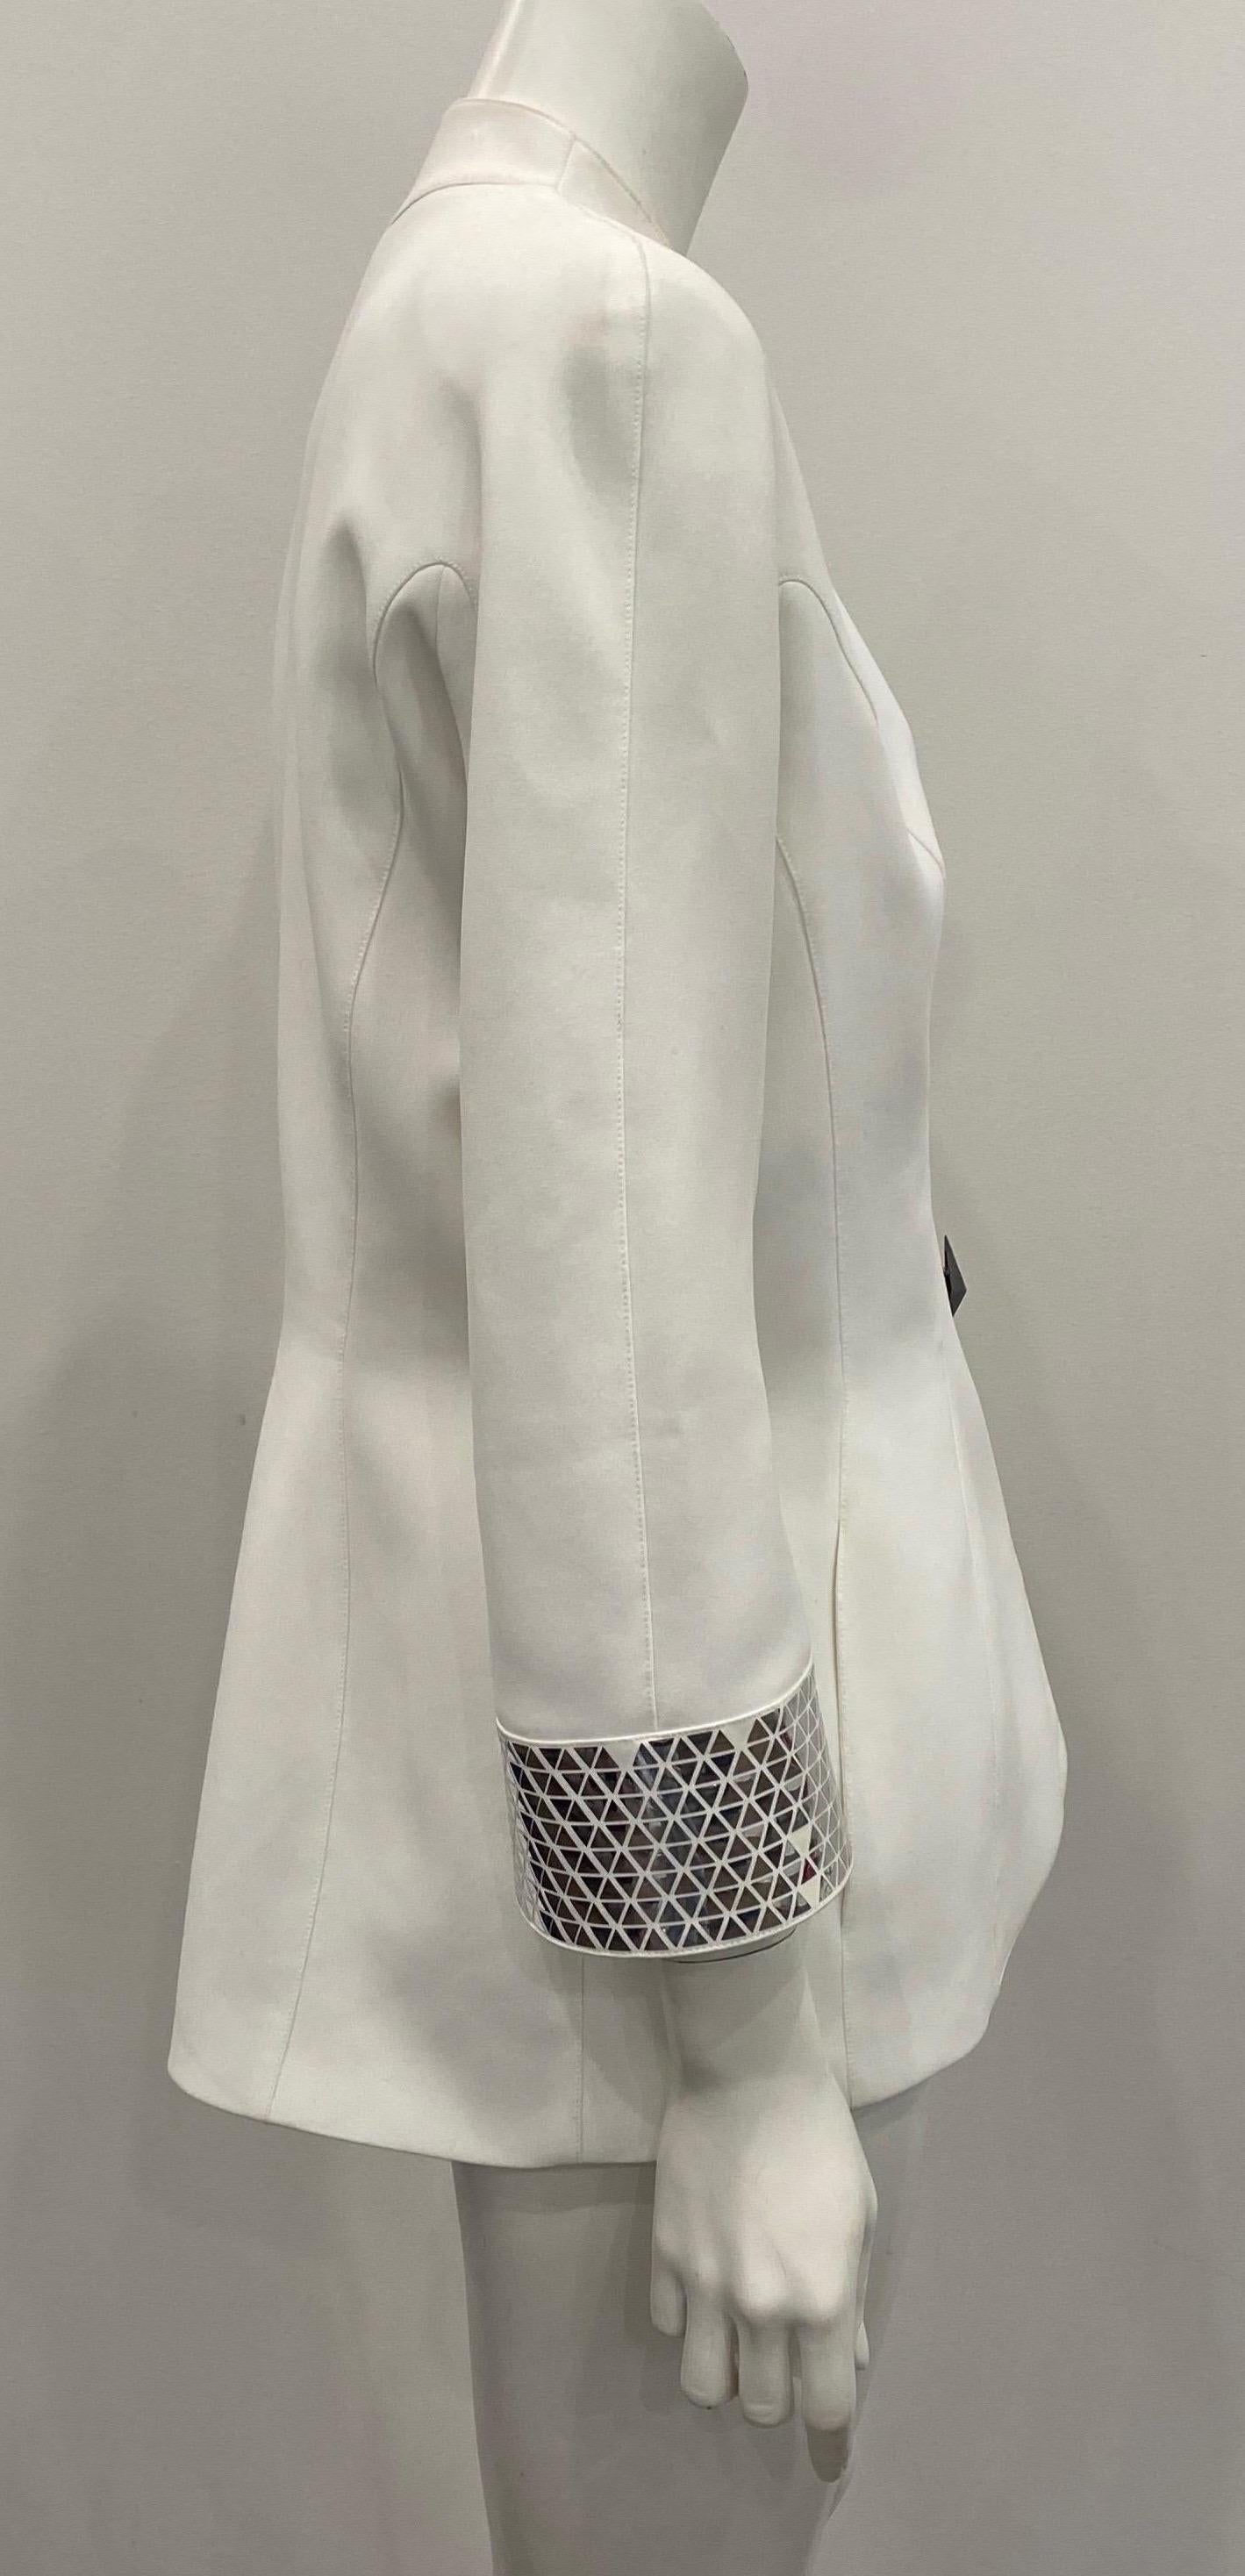 Thierry Mugler Couture 1990s White Jacket with Silver metallic details - Size 46 For Sale 3